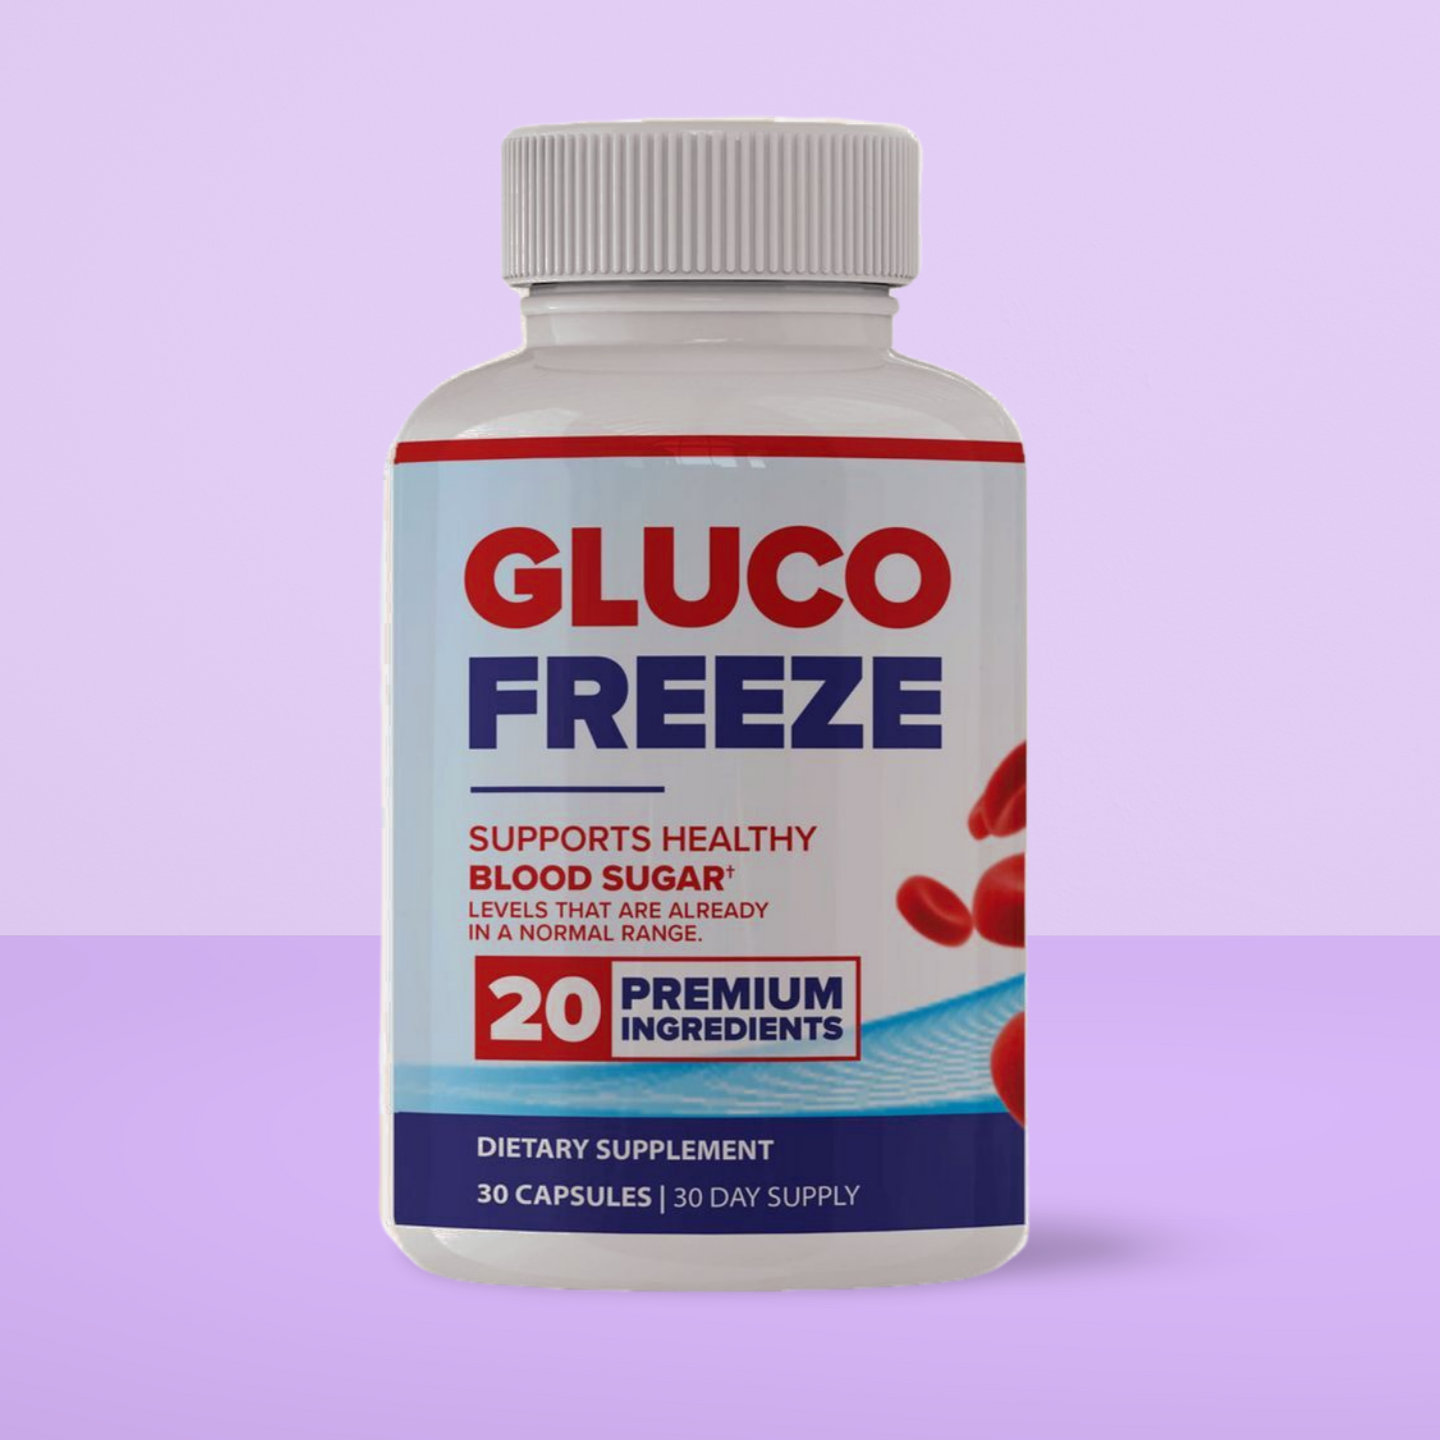 Gluco Freeze Reviews: Real Game-Changer for Blood Sugar? Delving into the Truth of This Supplement!